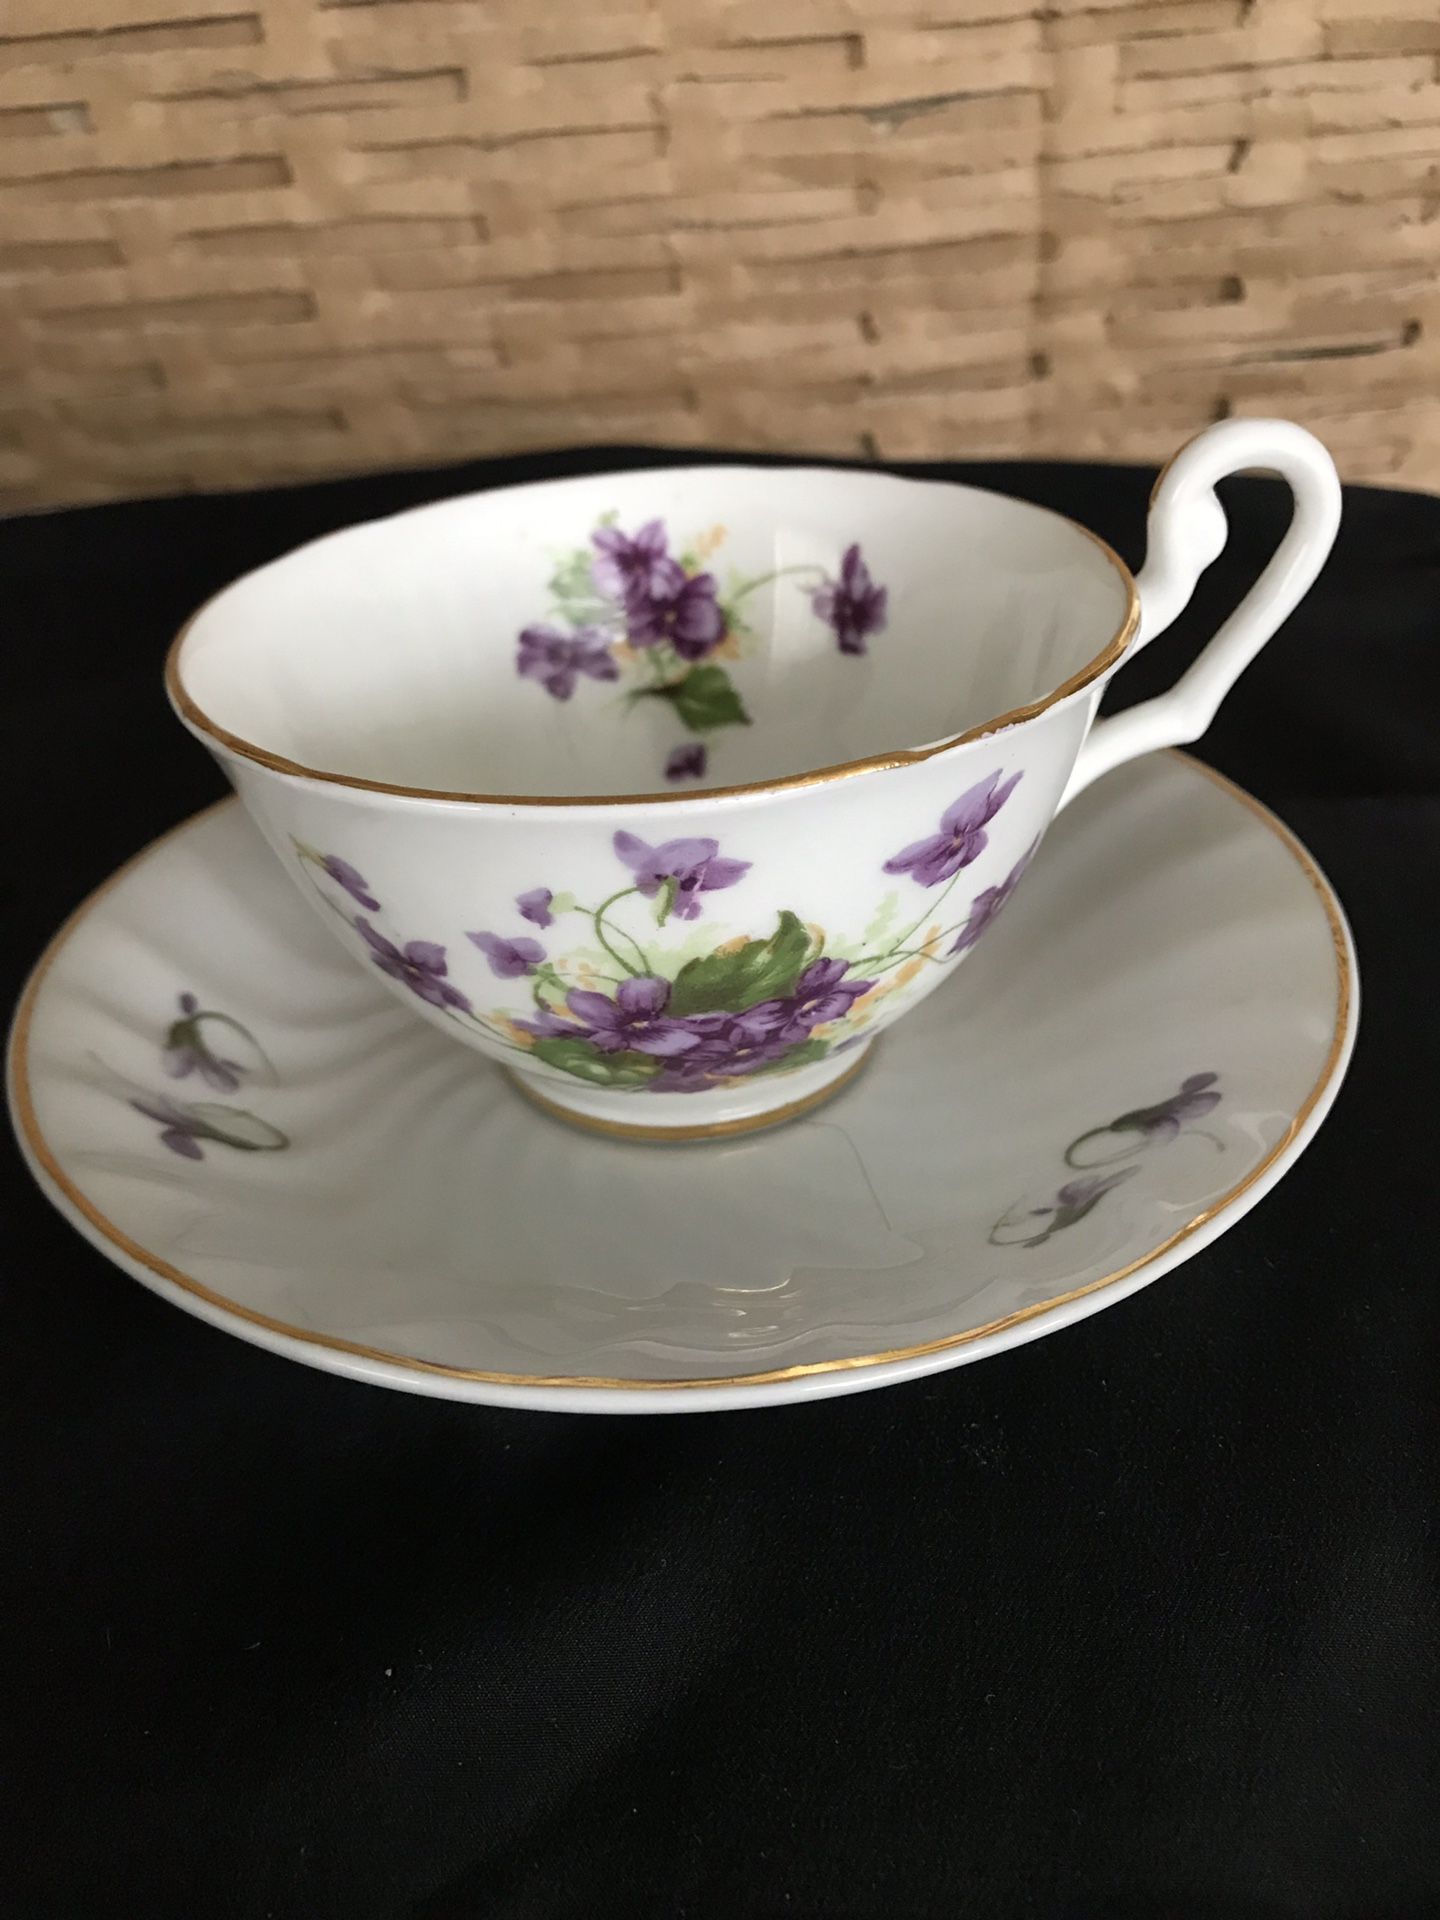 Clarence Bone China Teacup, Hand Painted Violet s on crisp white China Teacup, Saucer,not matched but perfect together..